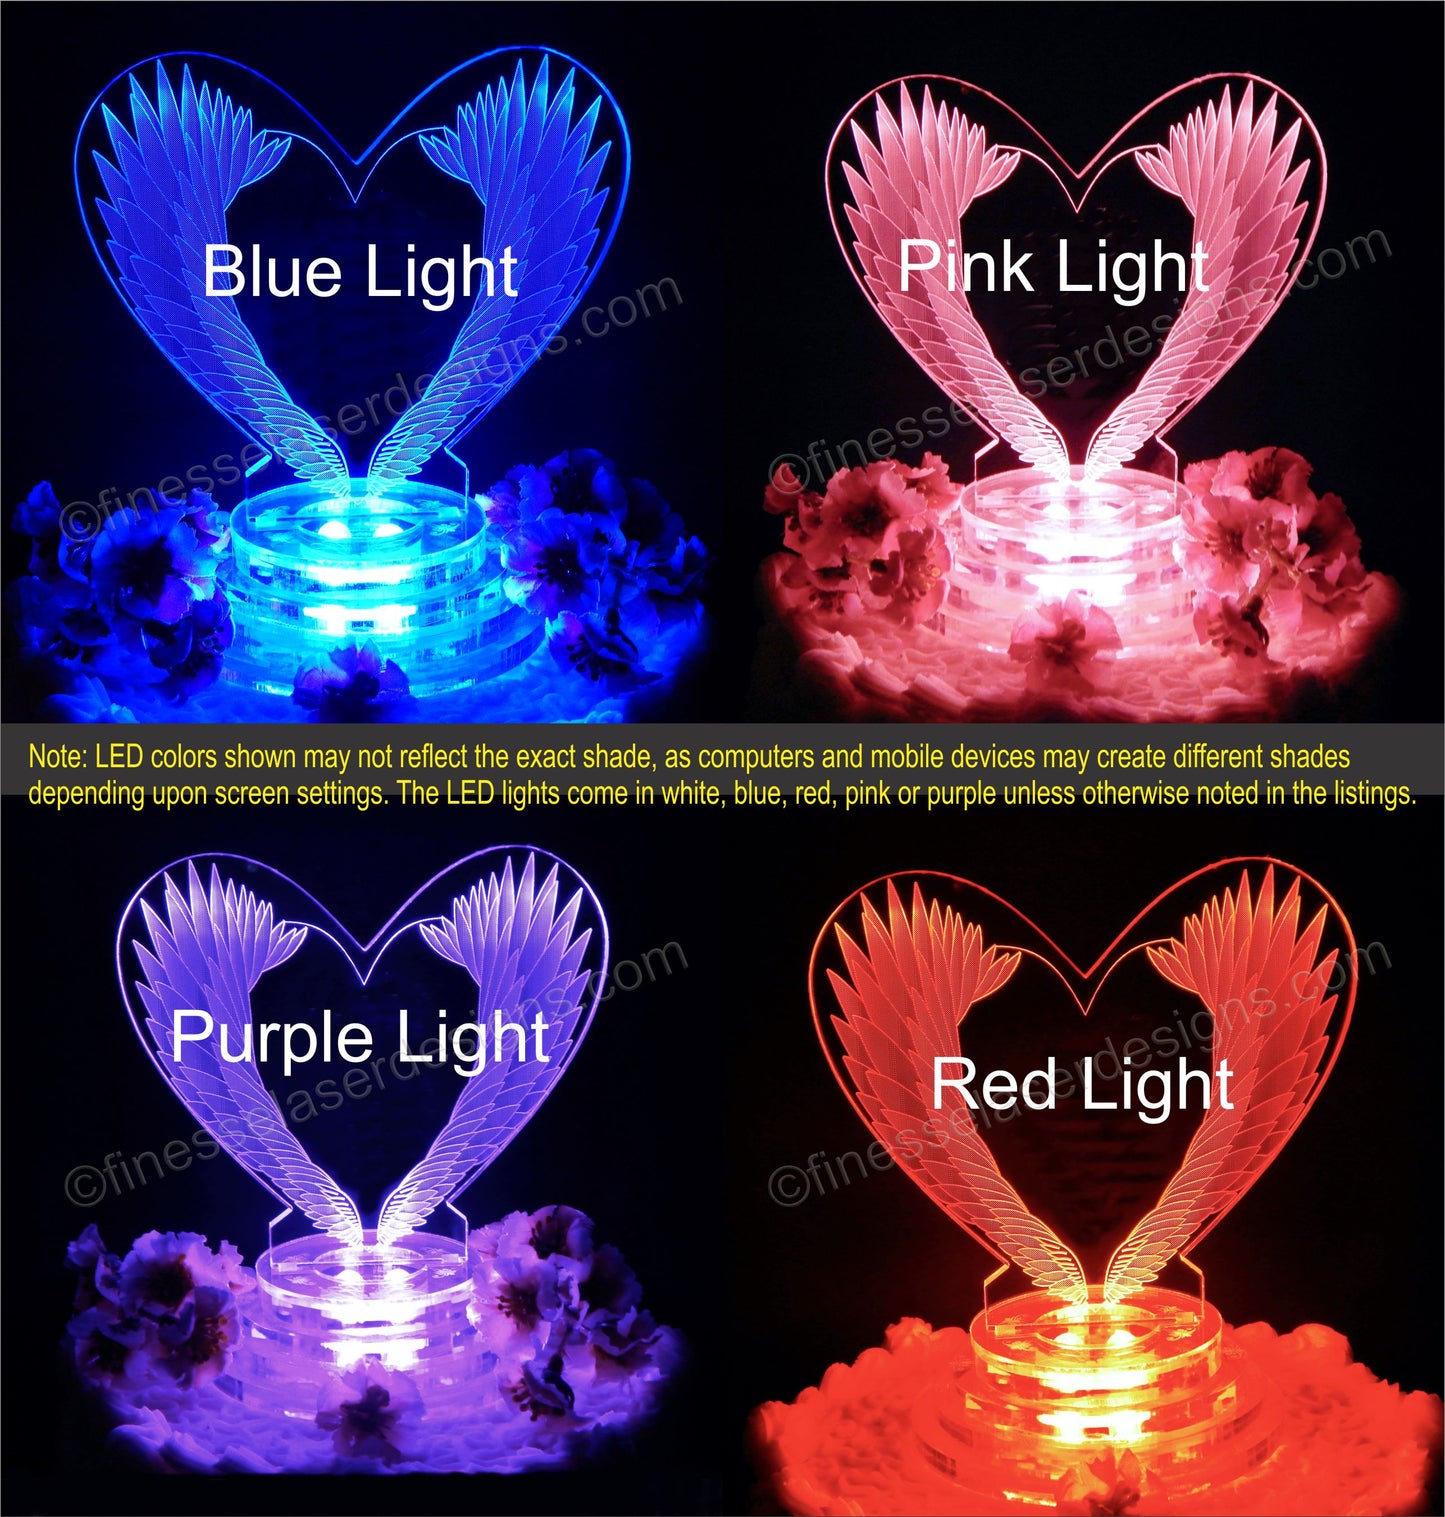 Colored views of acrylic heart shaped cake topper with angel wing design engraved showing pink, purple, blue and red lighted views